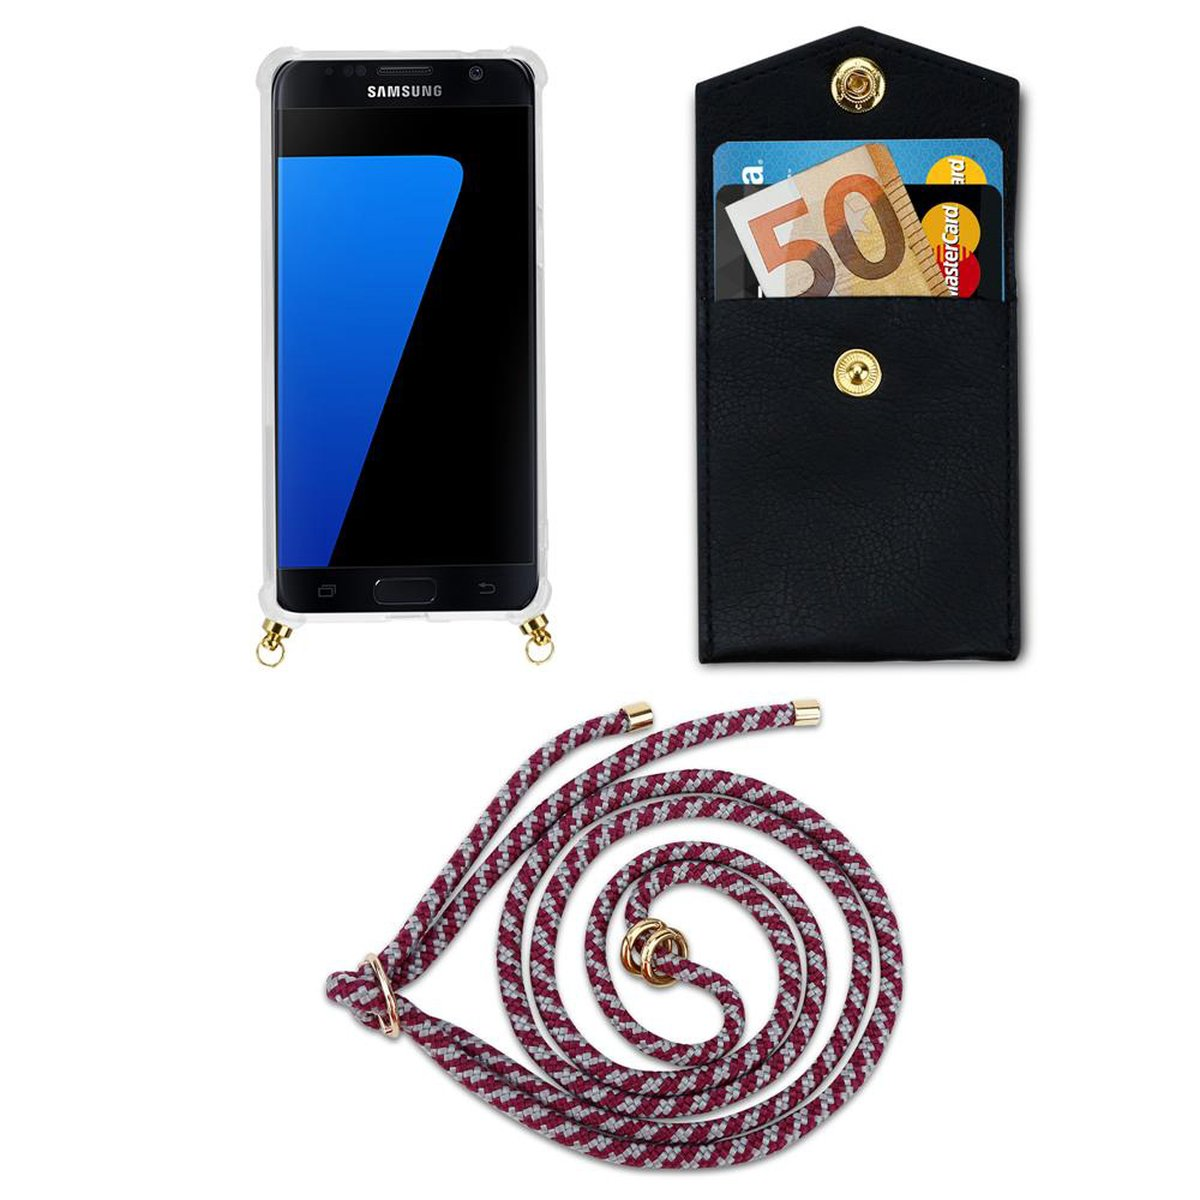 Samsung, WEIß Kette Gold Hülle, Band Ringen, und Backcover, Kordel CADORABO mit ROT S7, Handy abnehmbarer Galaxy